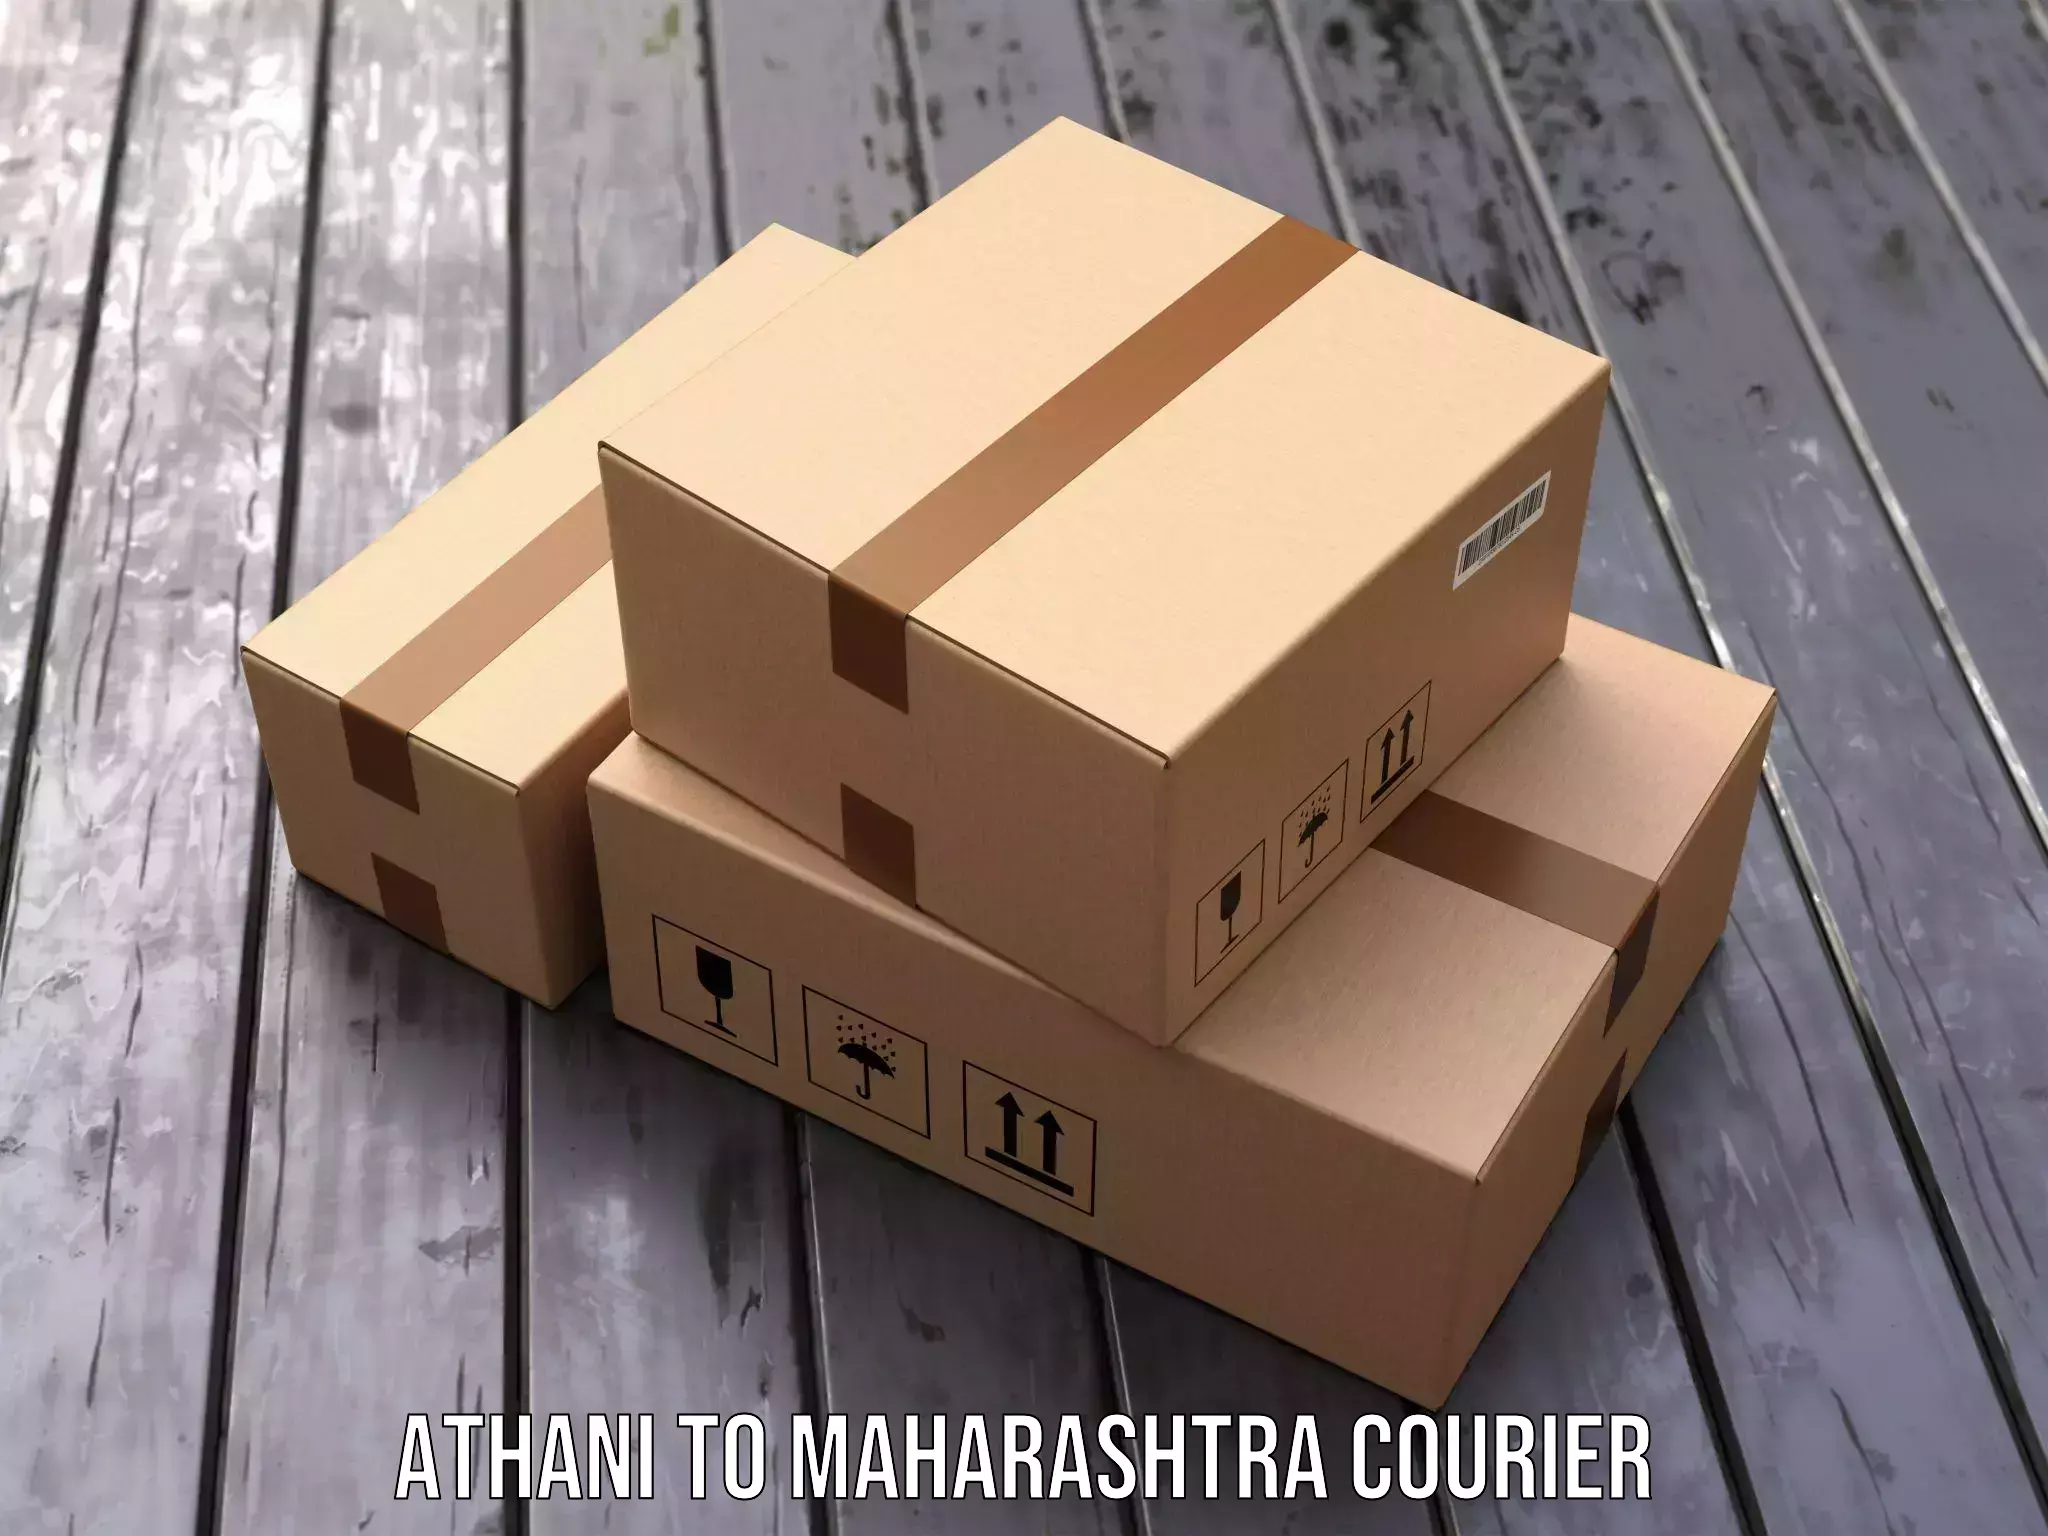 Courier service comparison Athani to IIIT Pune